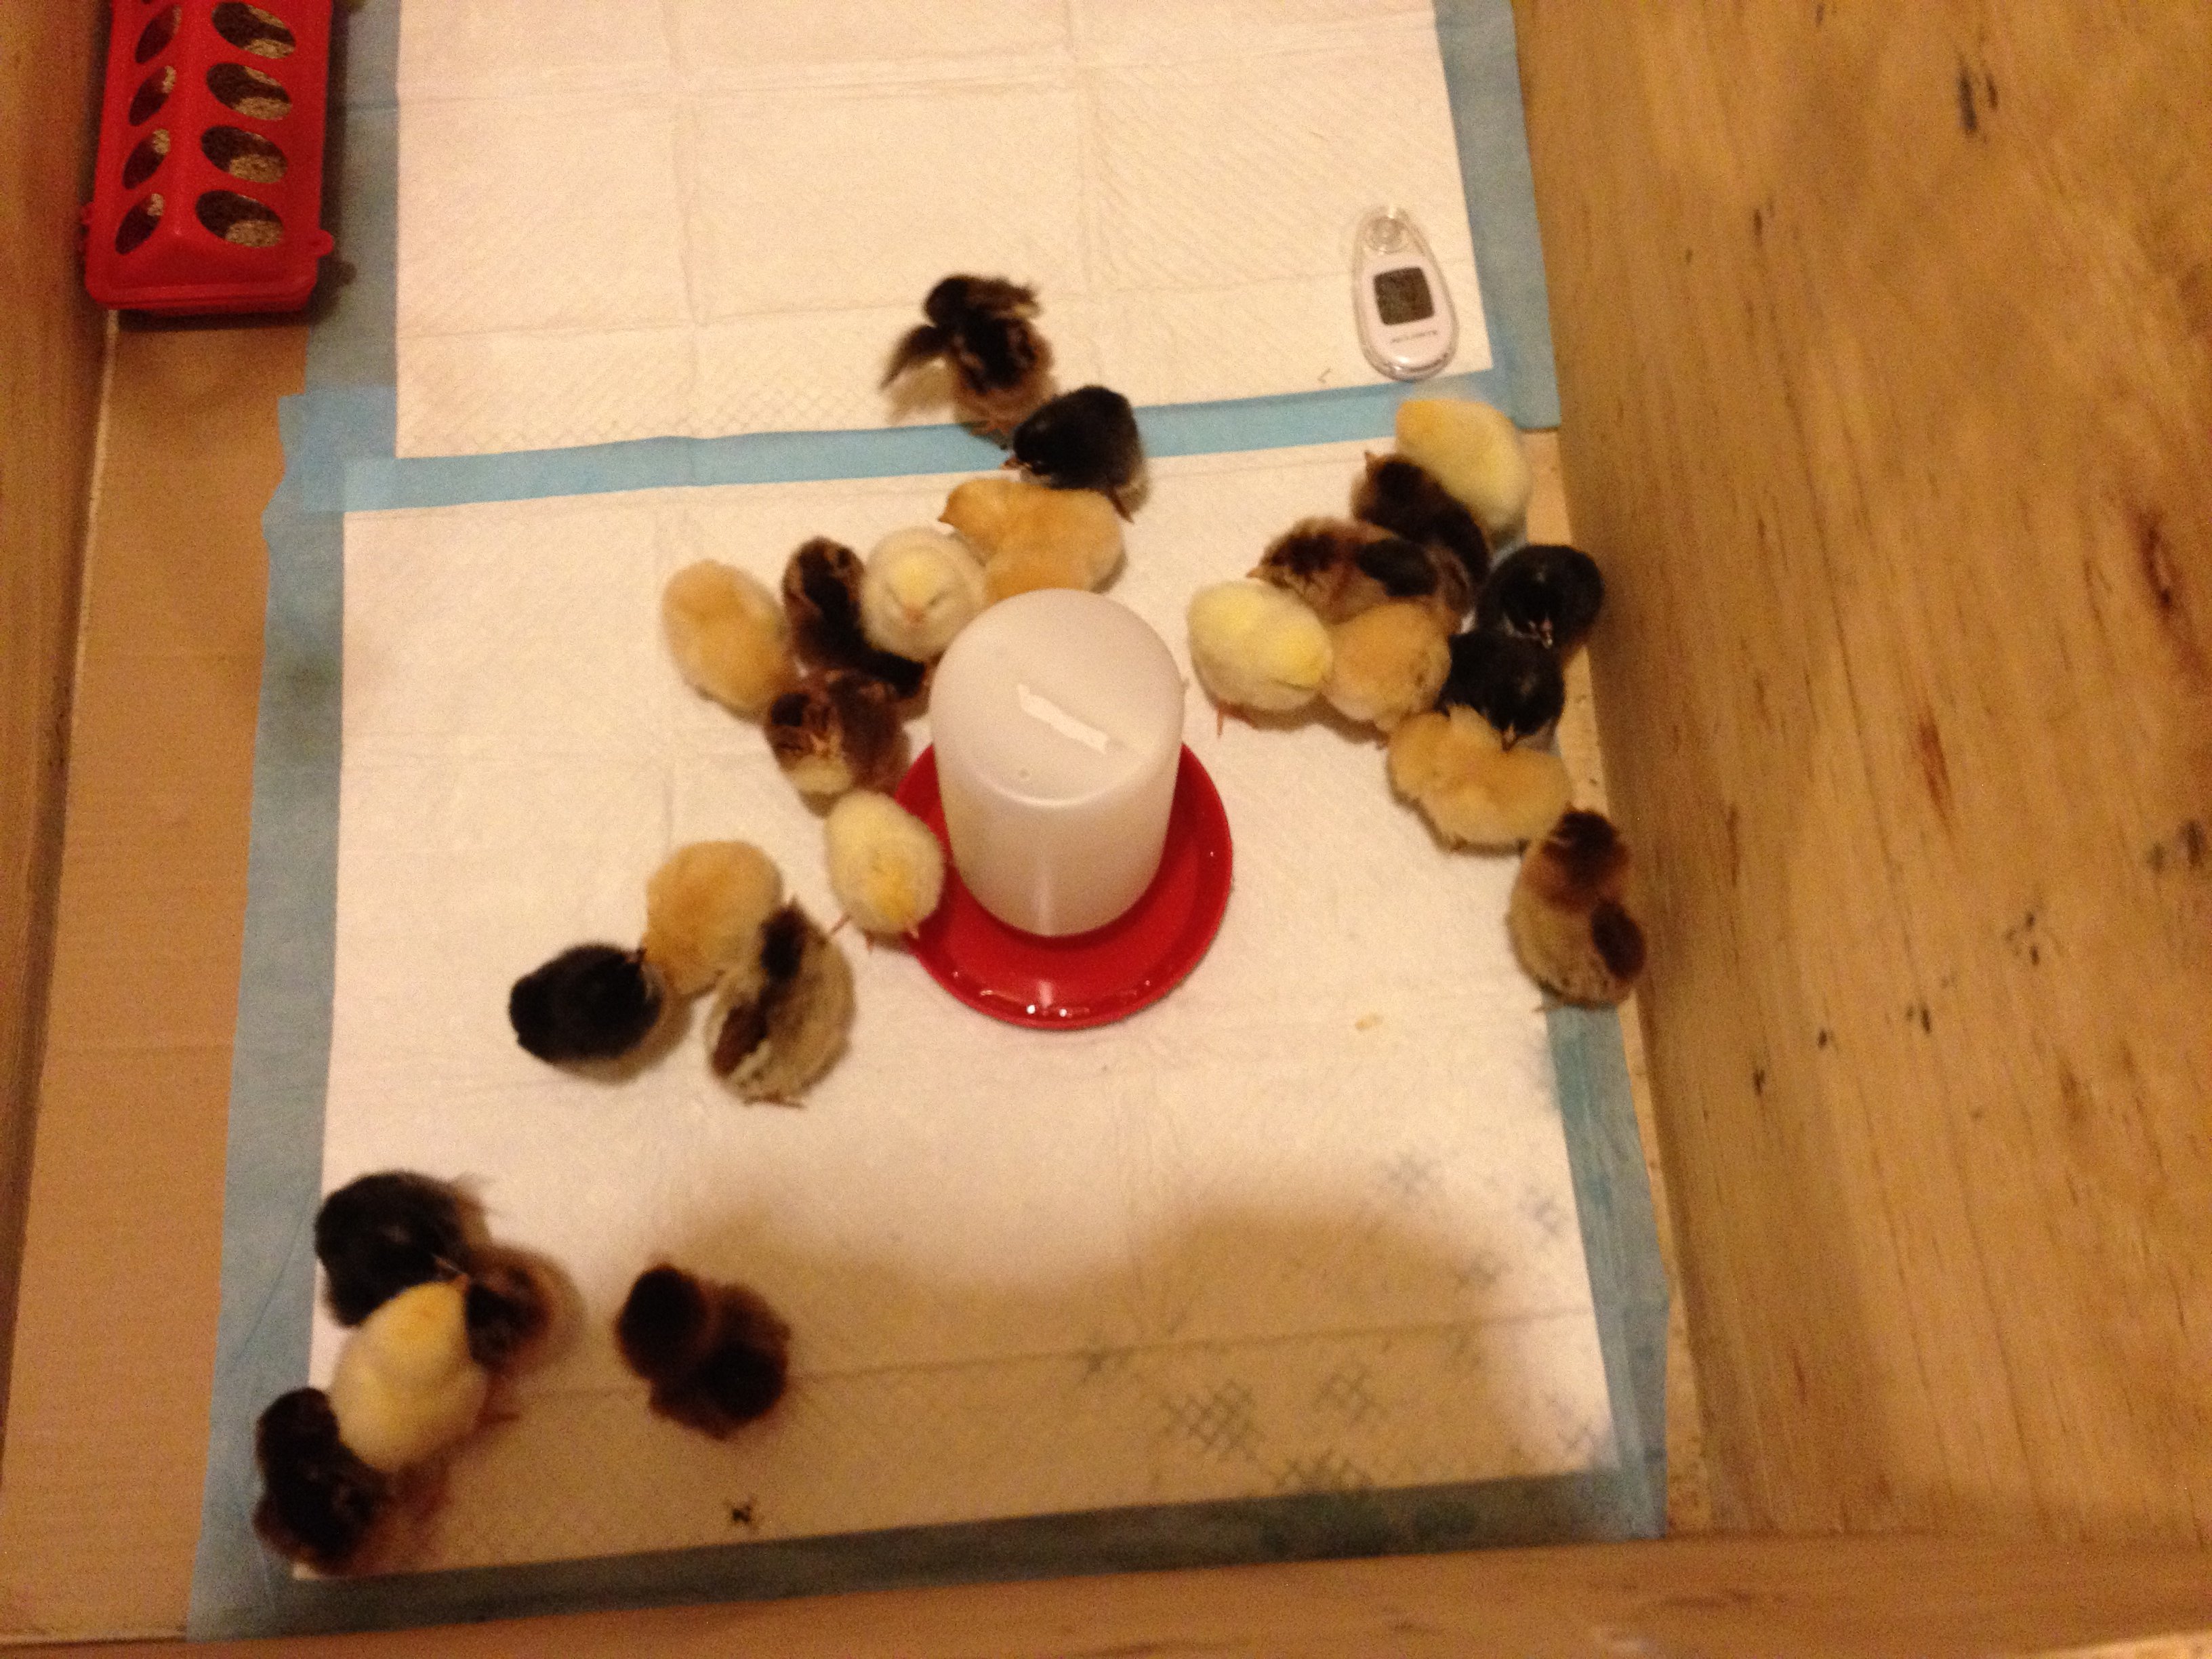 In the brooder.